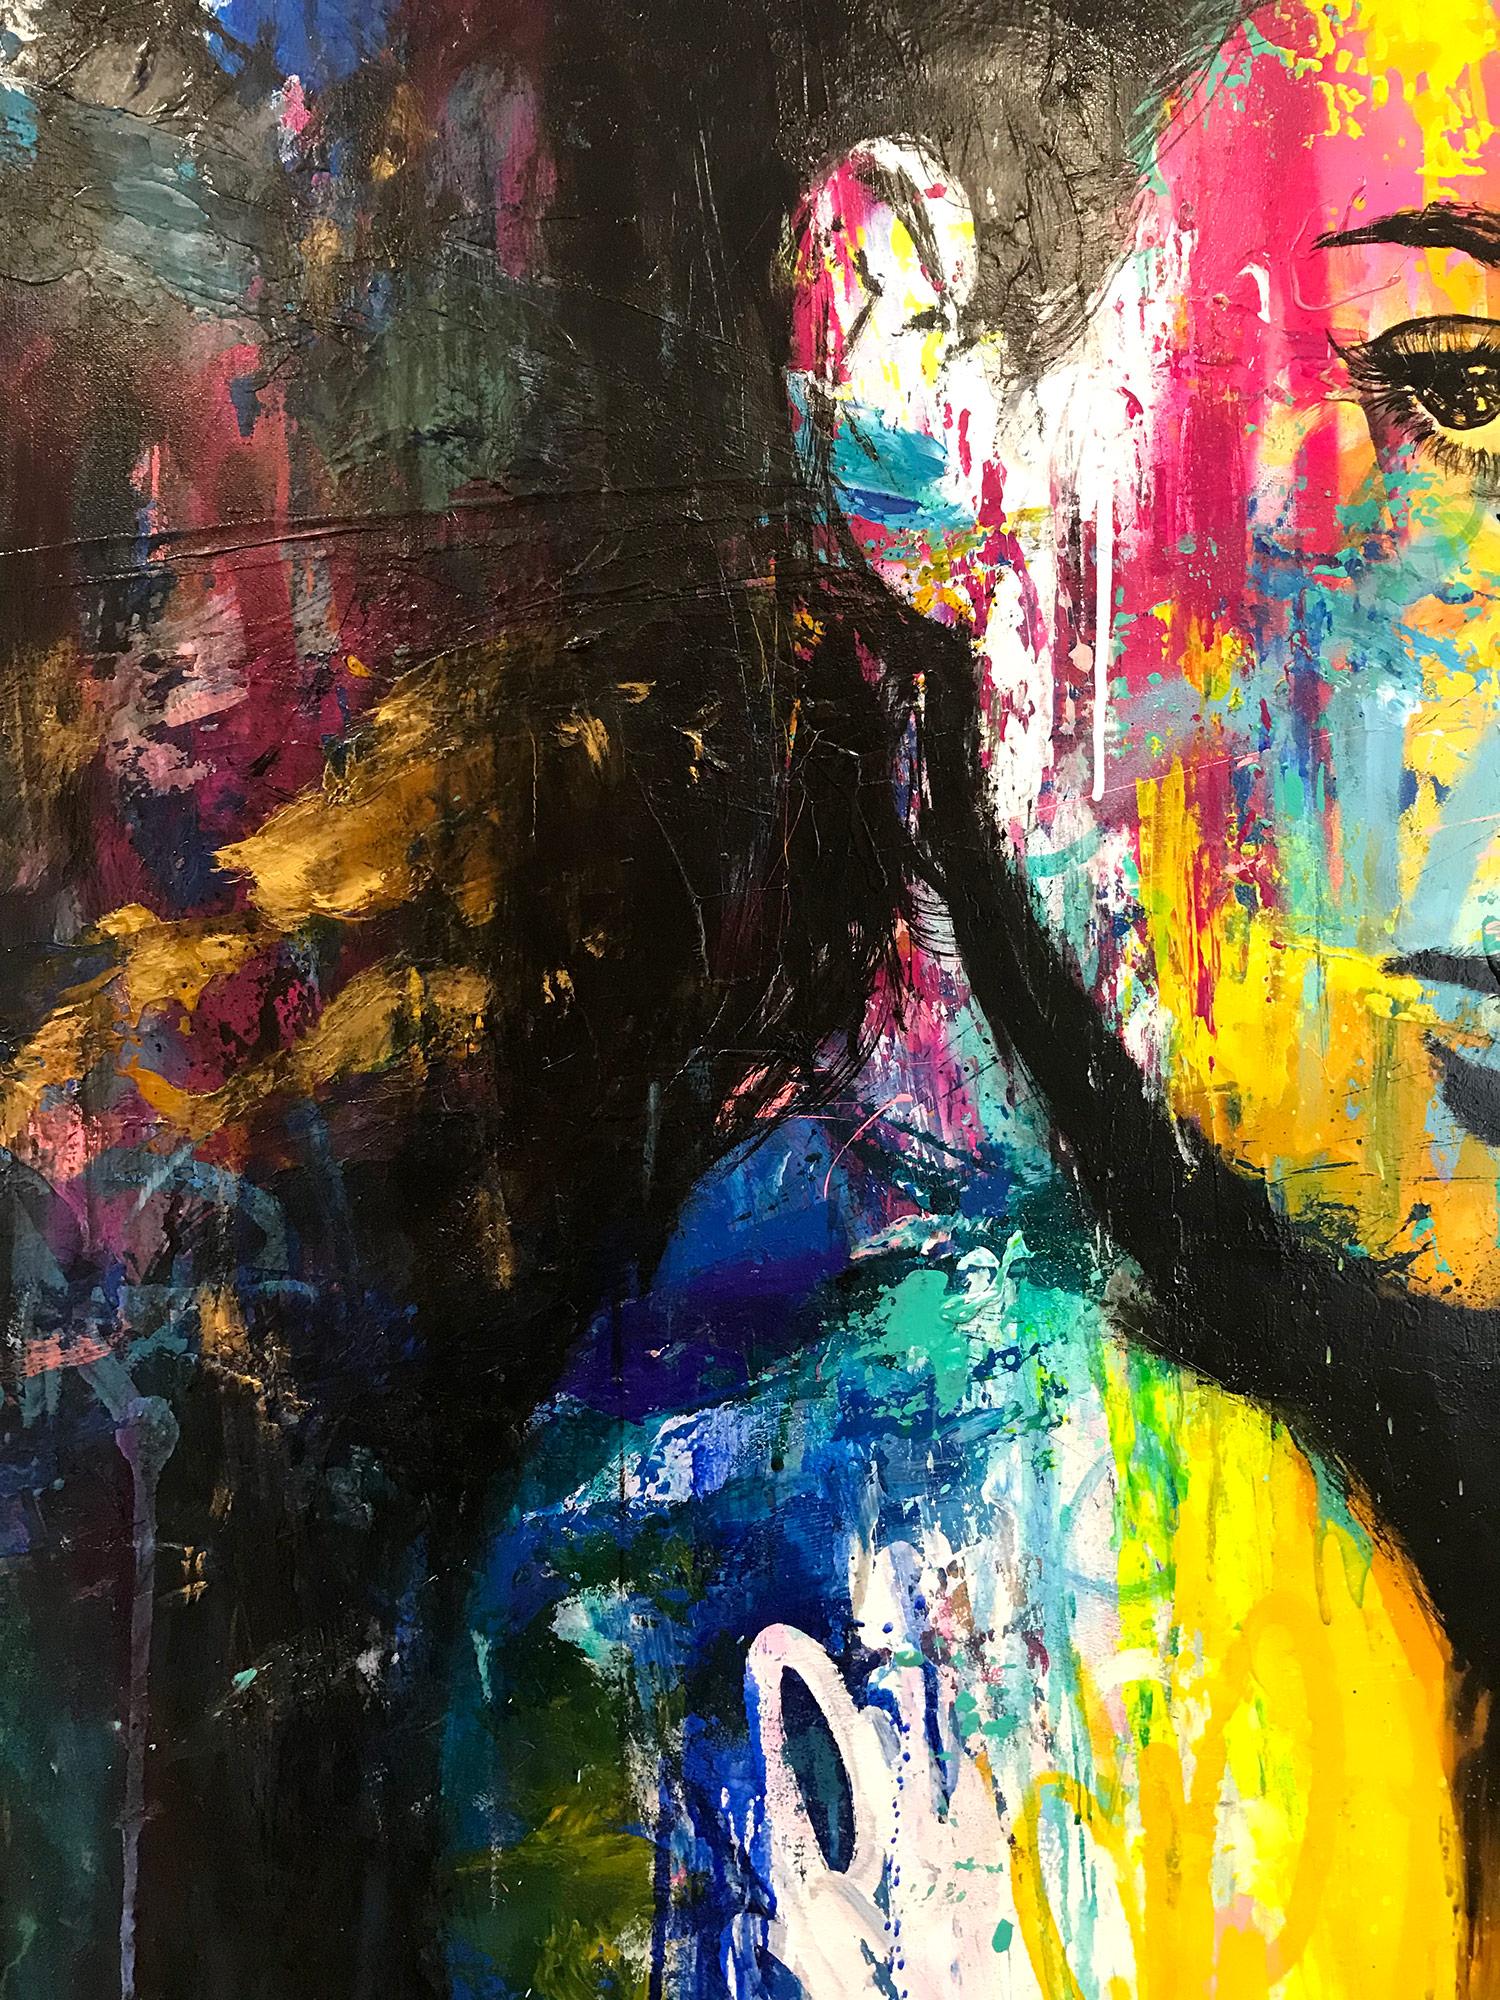 JM Robert's portraits start with a bright a bold background done with spray paint. JM started his career as a graffiti artist, painting his signature portraits on the walls of Paris France, and parts of Europe. Today he is able to bridge Fine Art